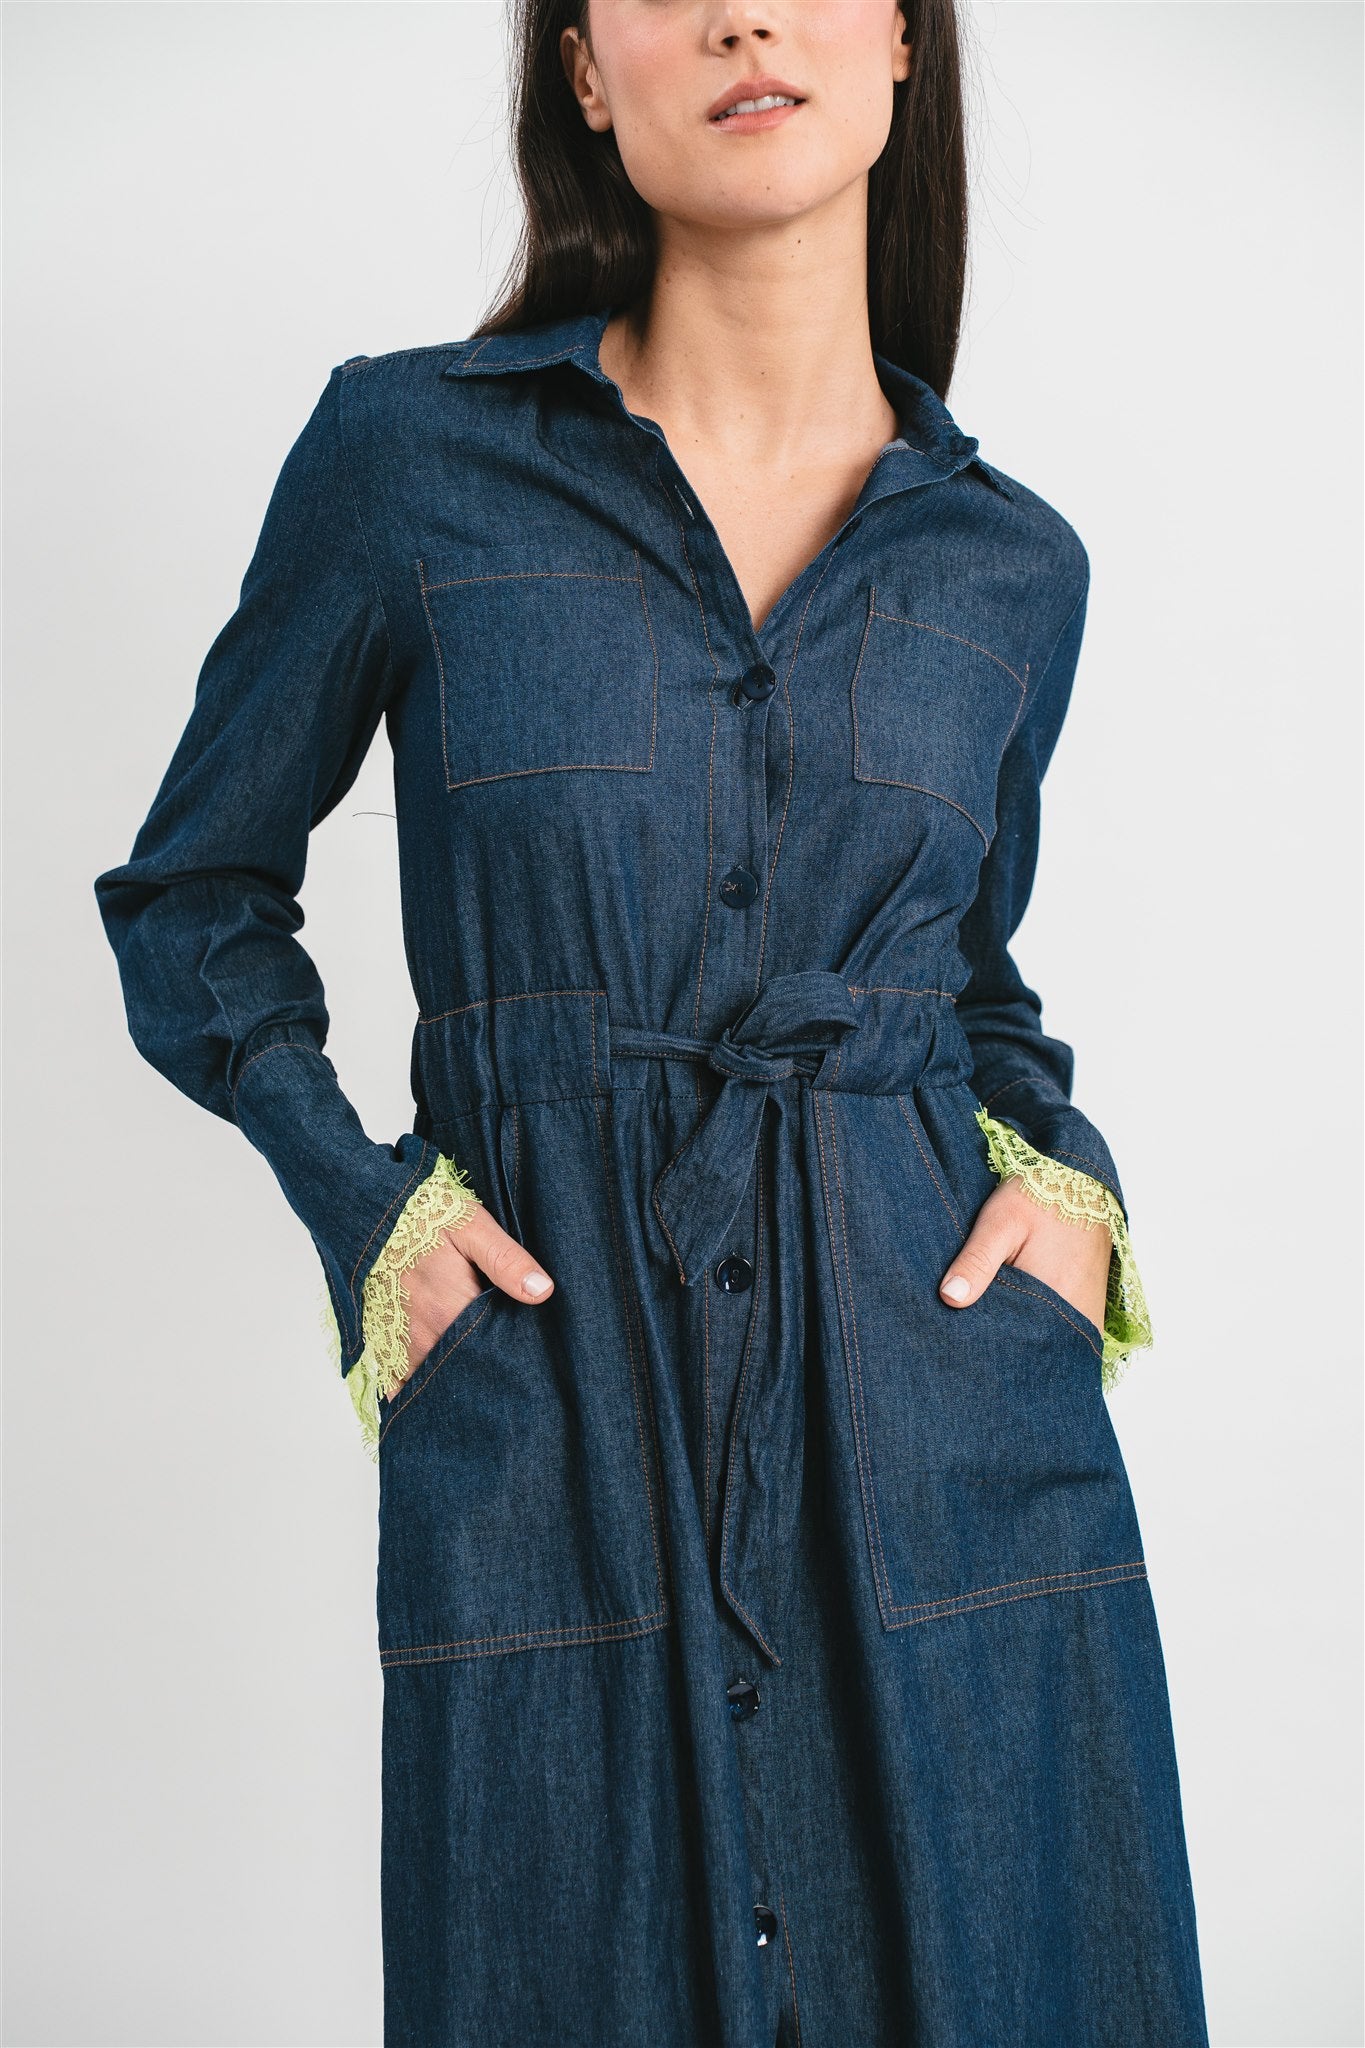 Lightweight denim chemisier dress with contrasting belt and lace